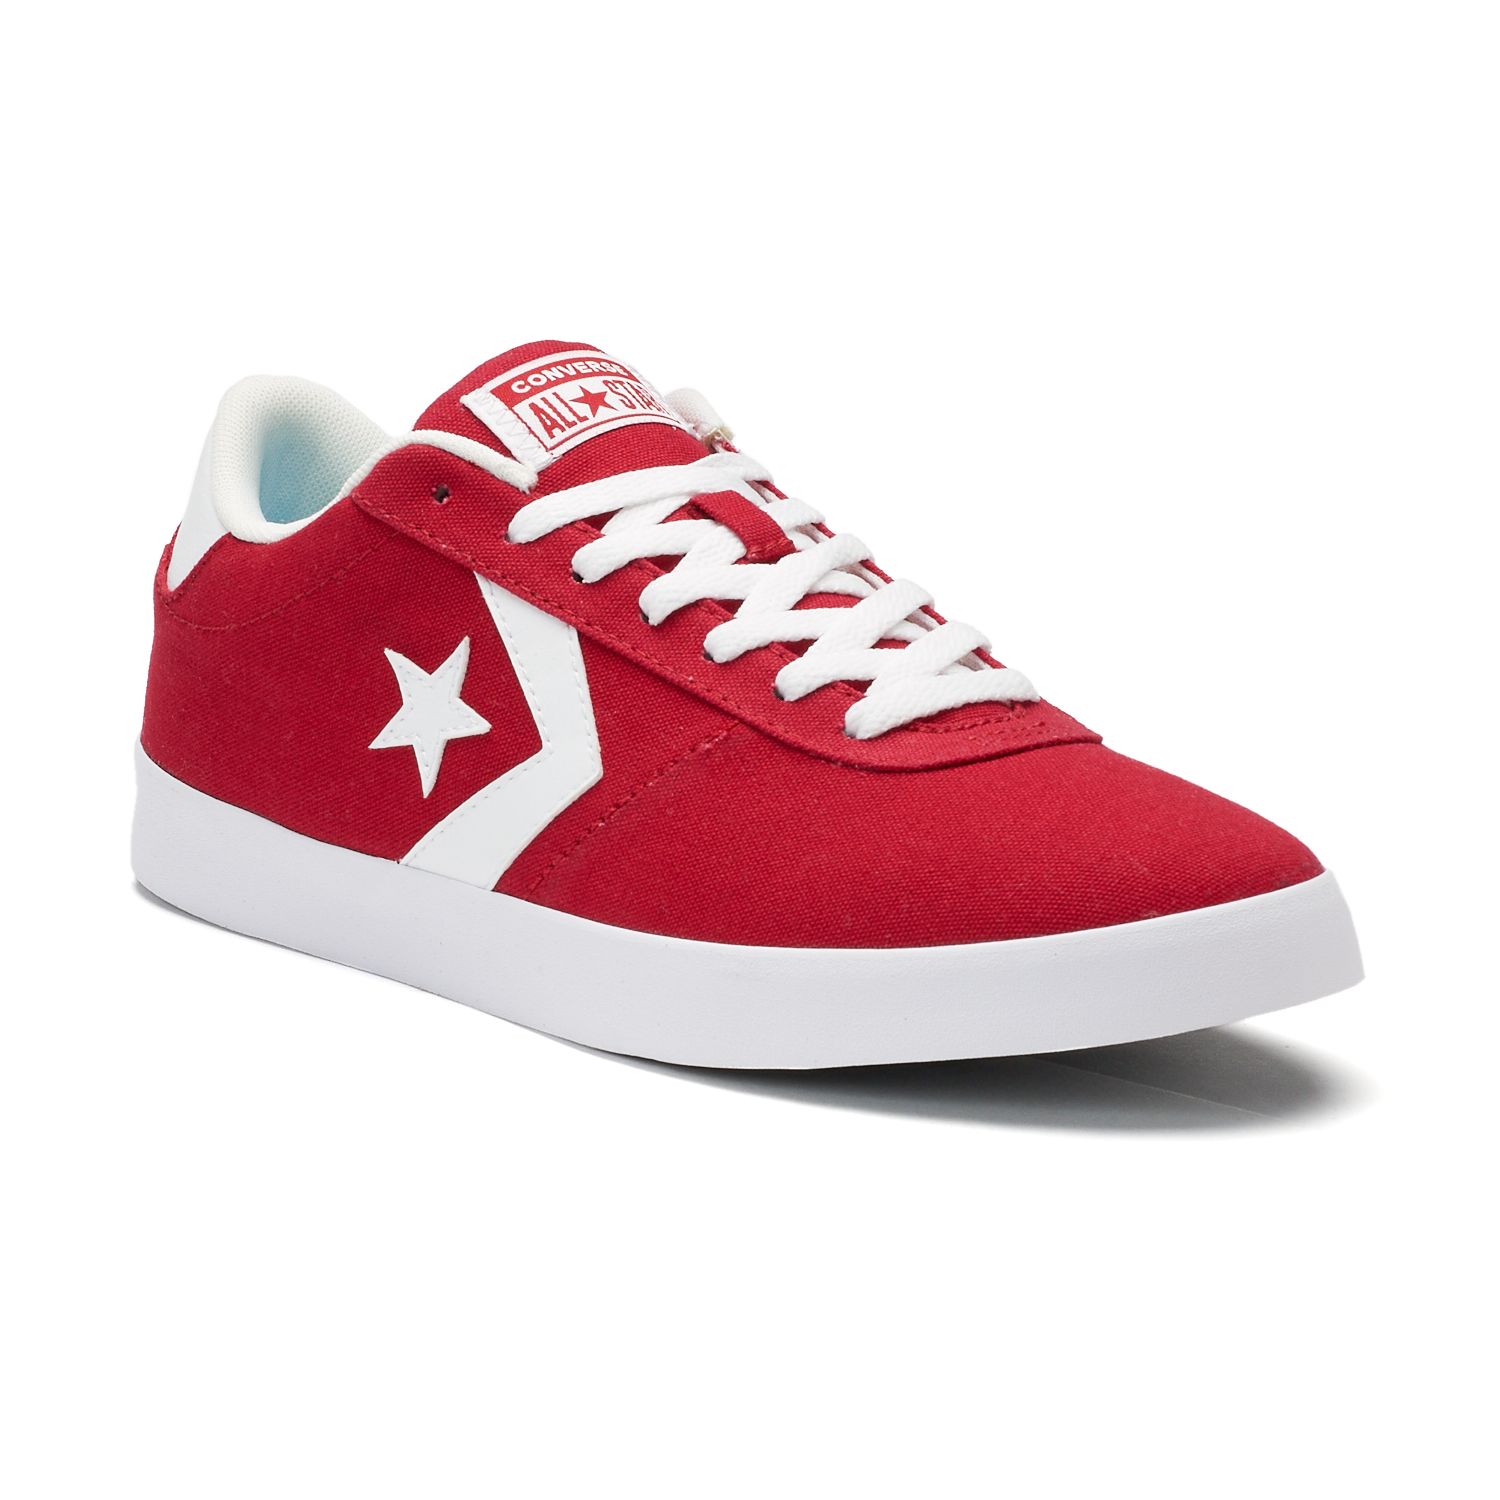 Converse Point Star Ox Men's Sneakers